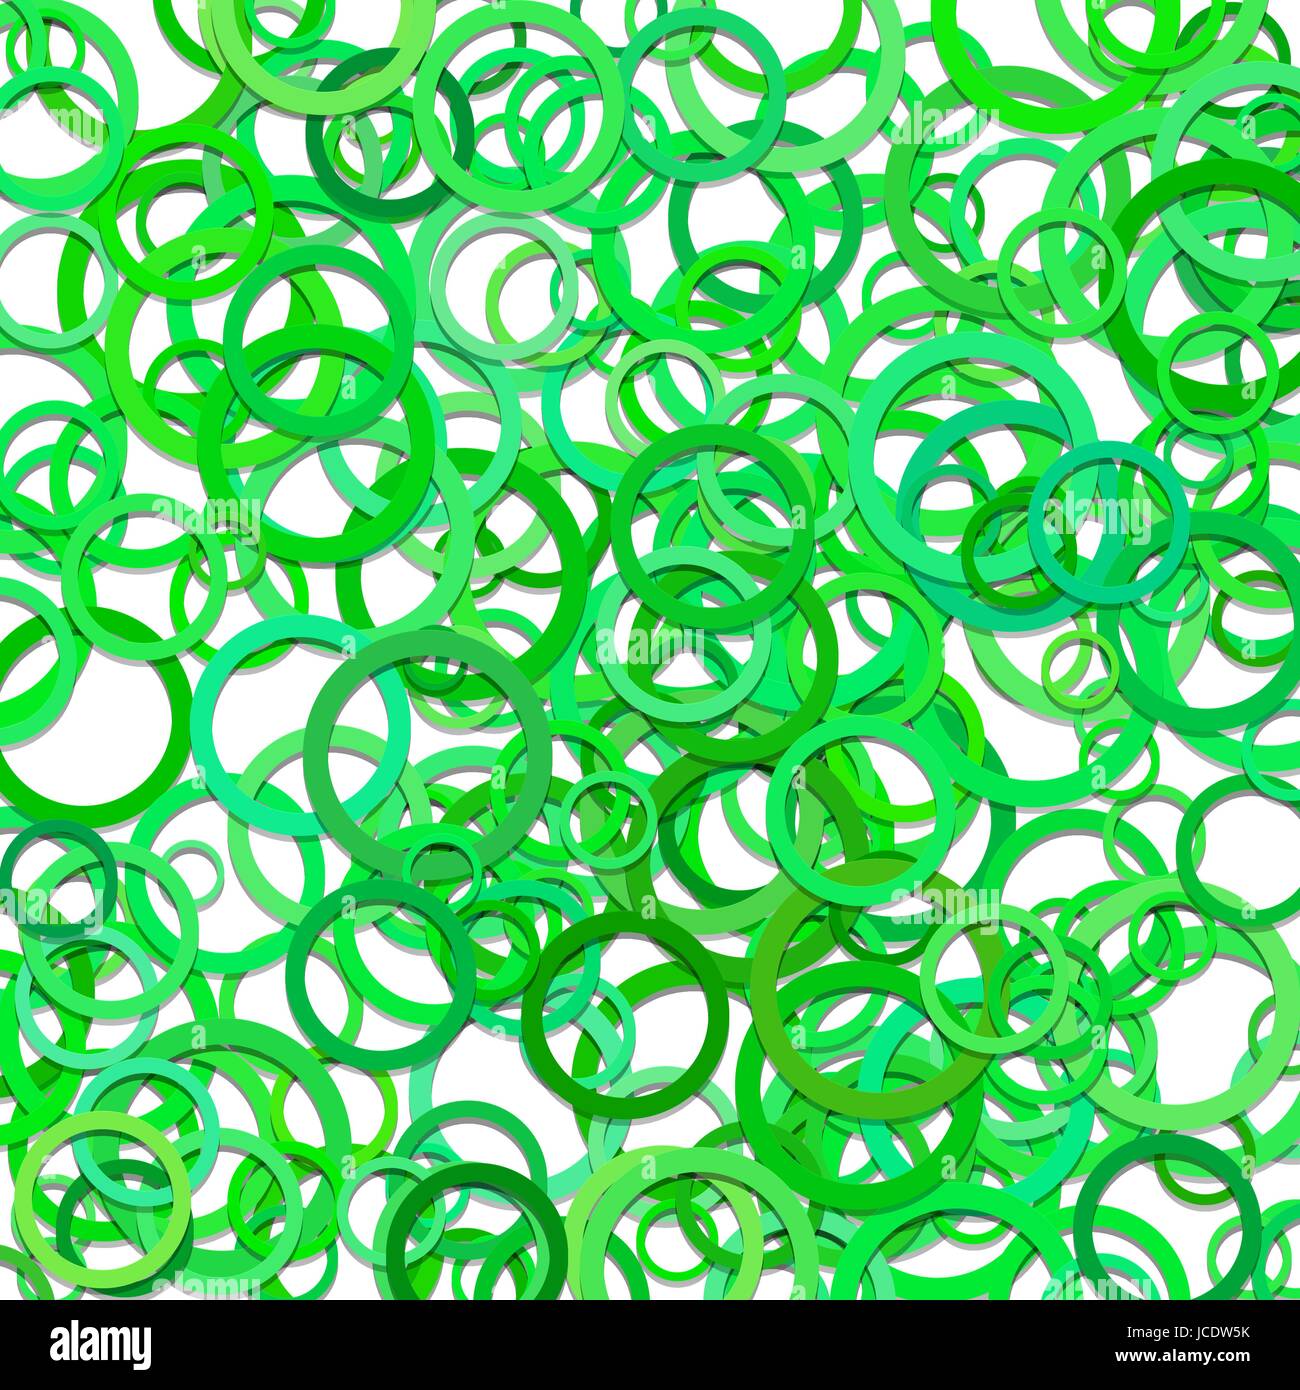 Green abstract chaotic circle pattern background Stock Vector